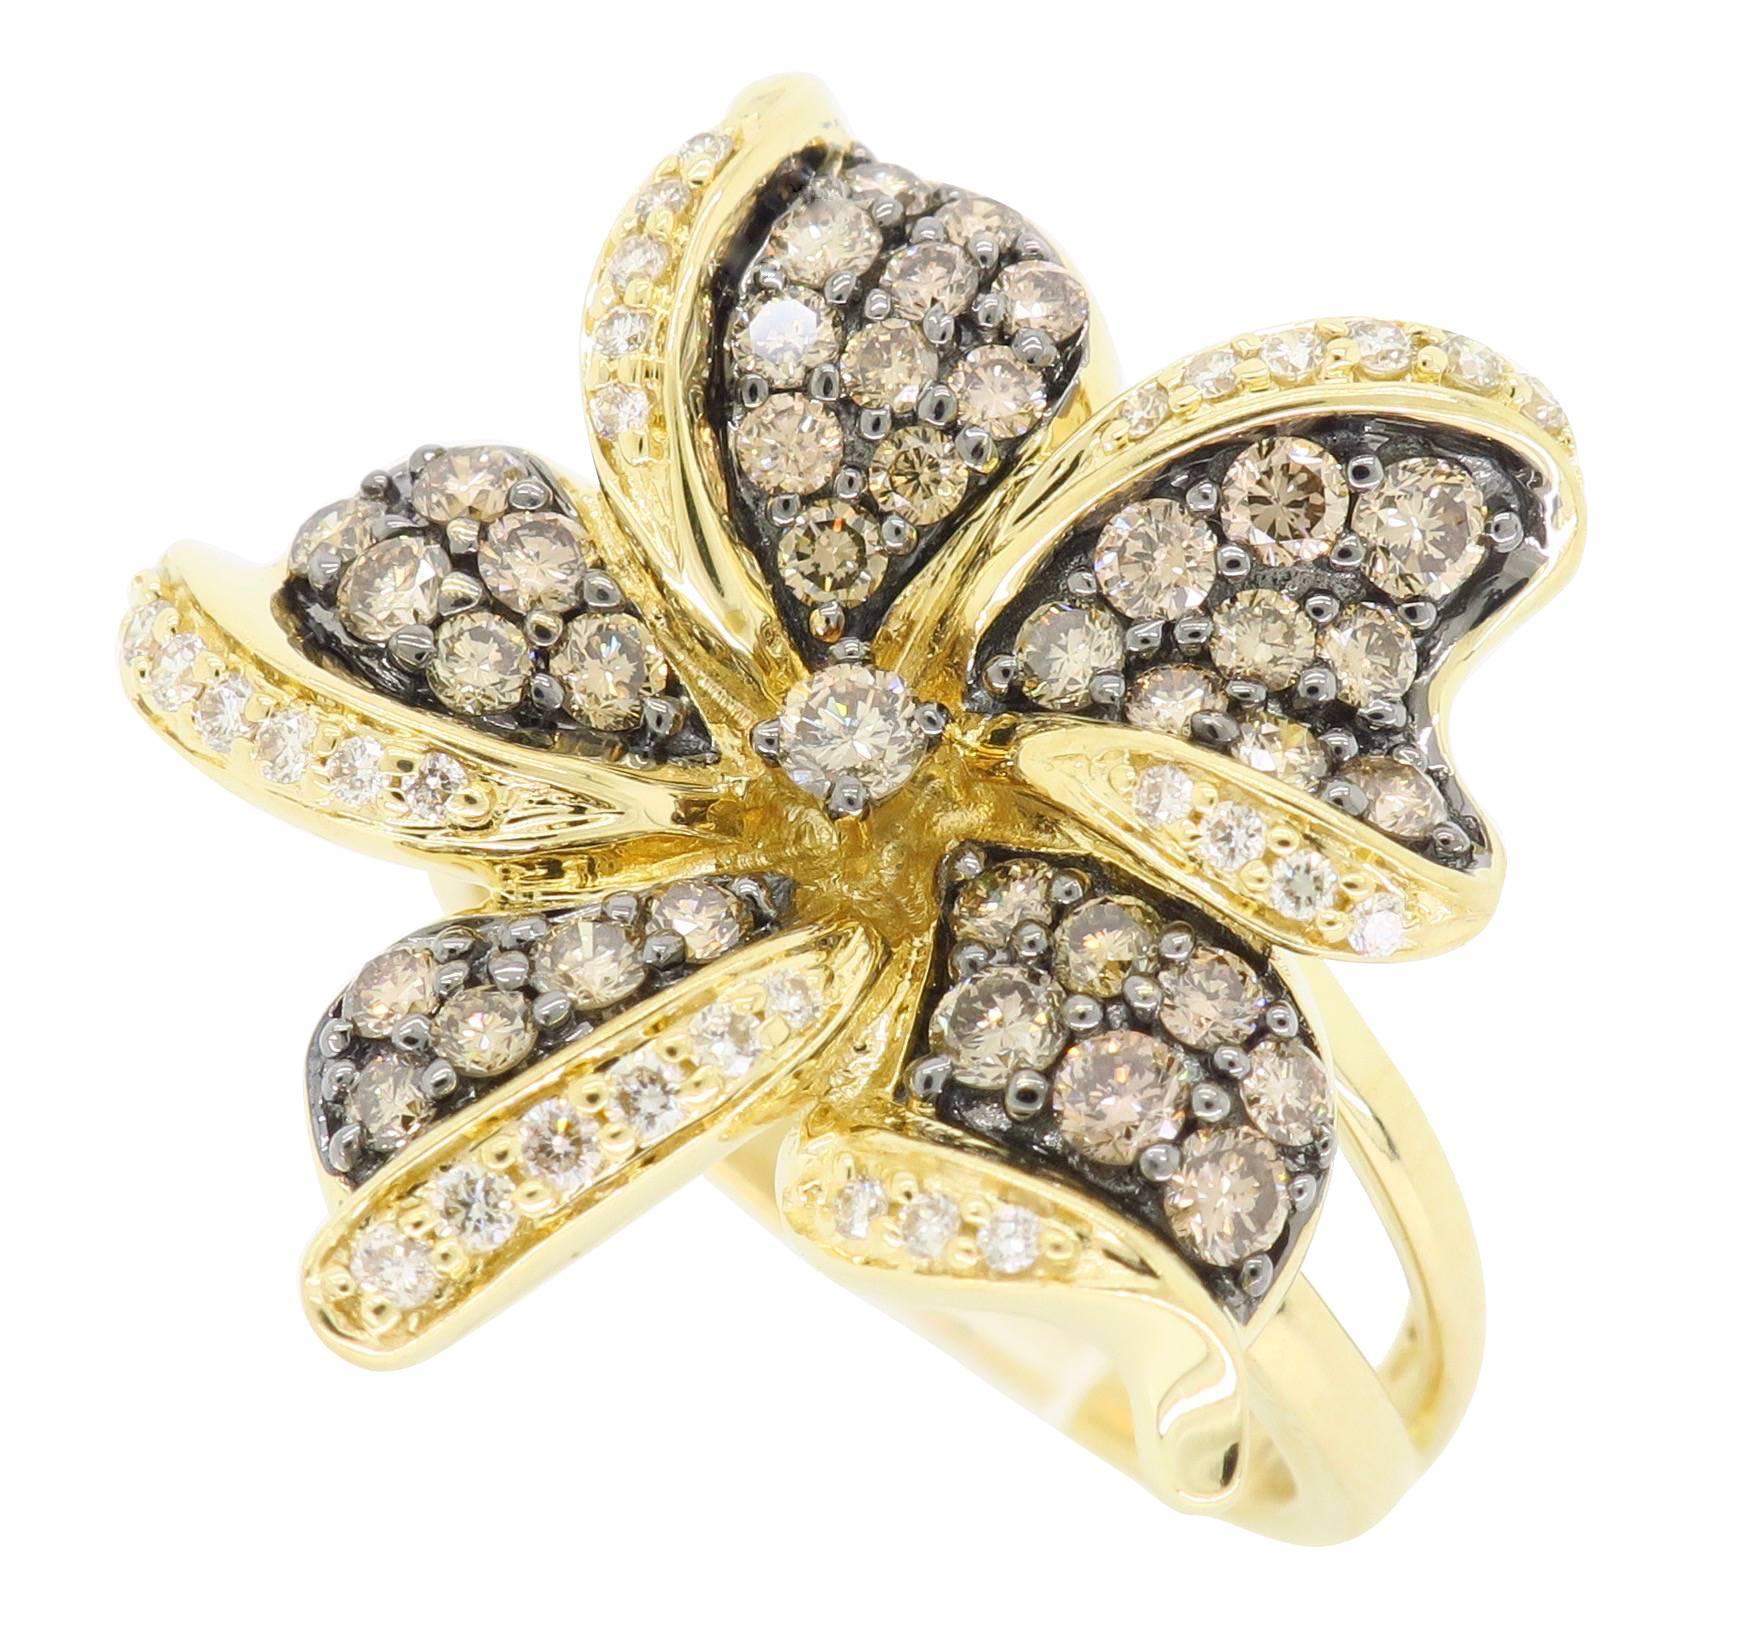 This beautiful flower shaped ring designed by Le Vian features approximately 1.50CTW of diamonds.

Designer: Le Vian
Gemstone: Diamond
Diamond Carat Weight: Approximately 1.50CTW
Diamond Cut: 70 Round Brilliant 
Color: 39 Chocolate Color, 31 Average